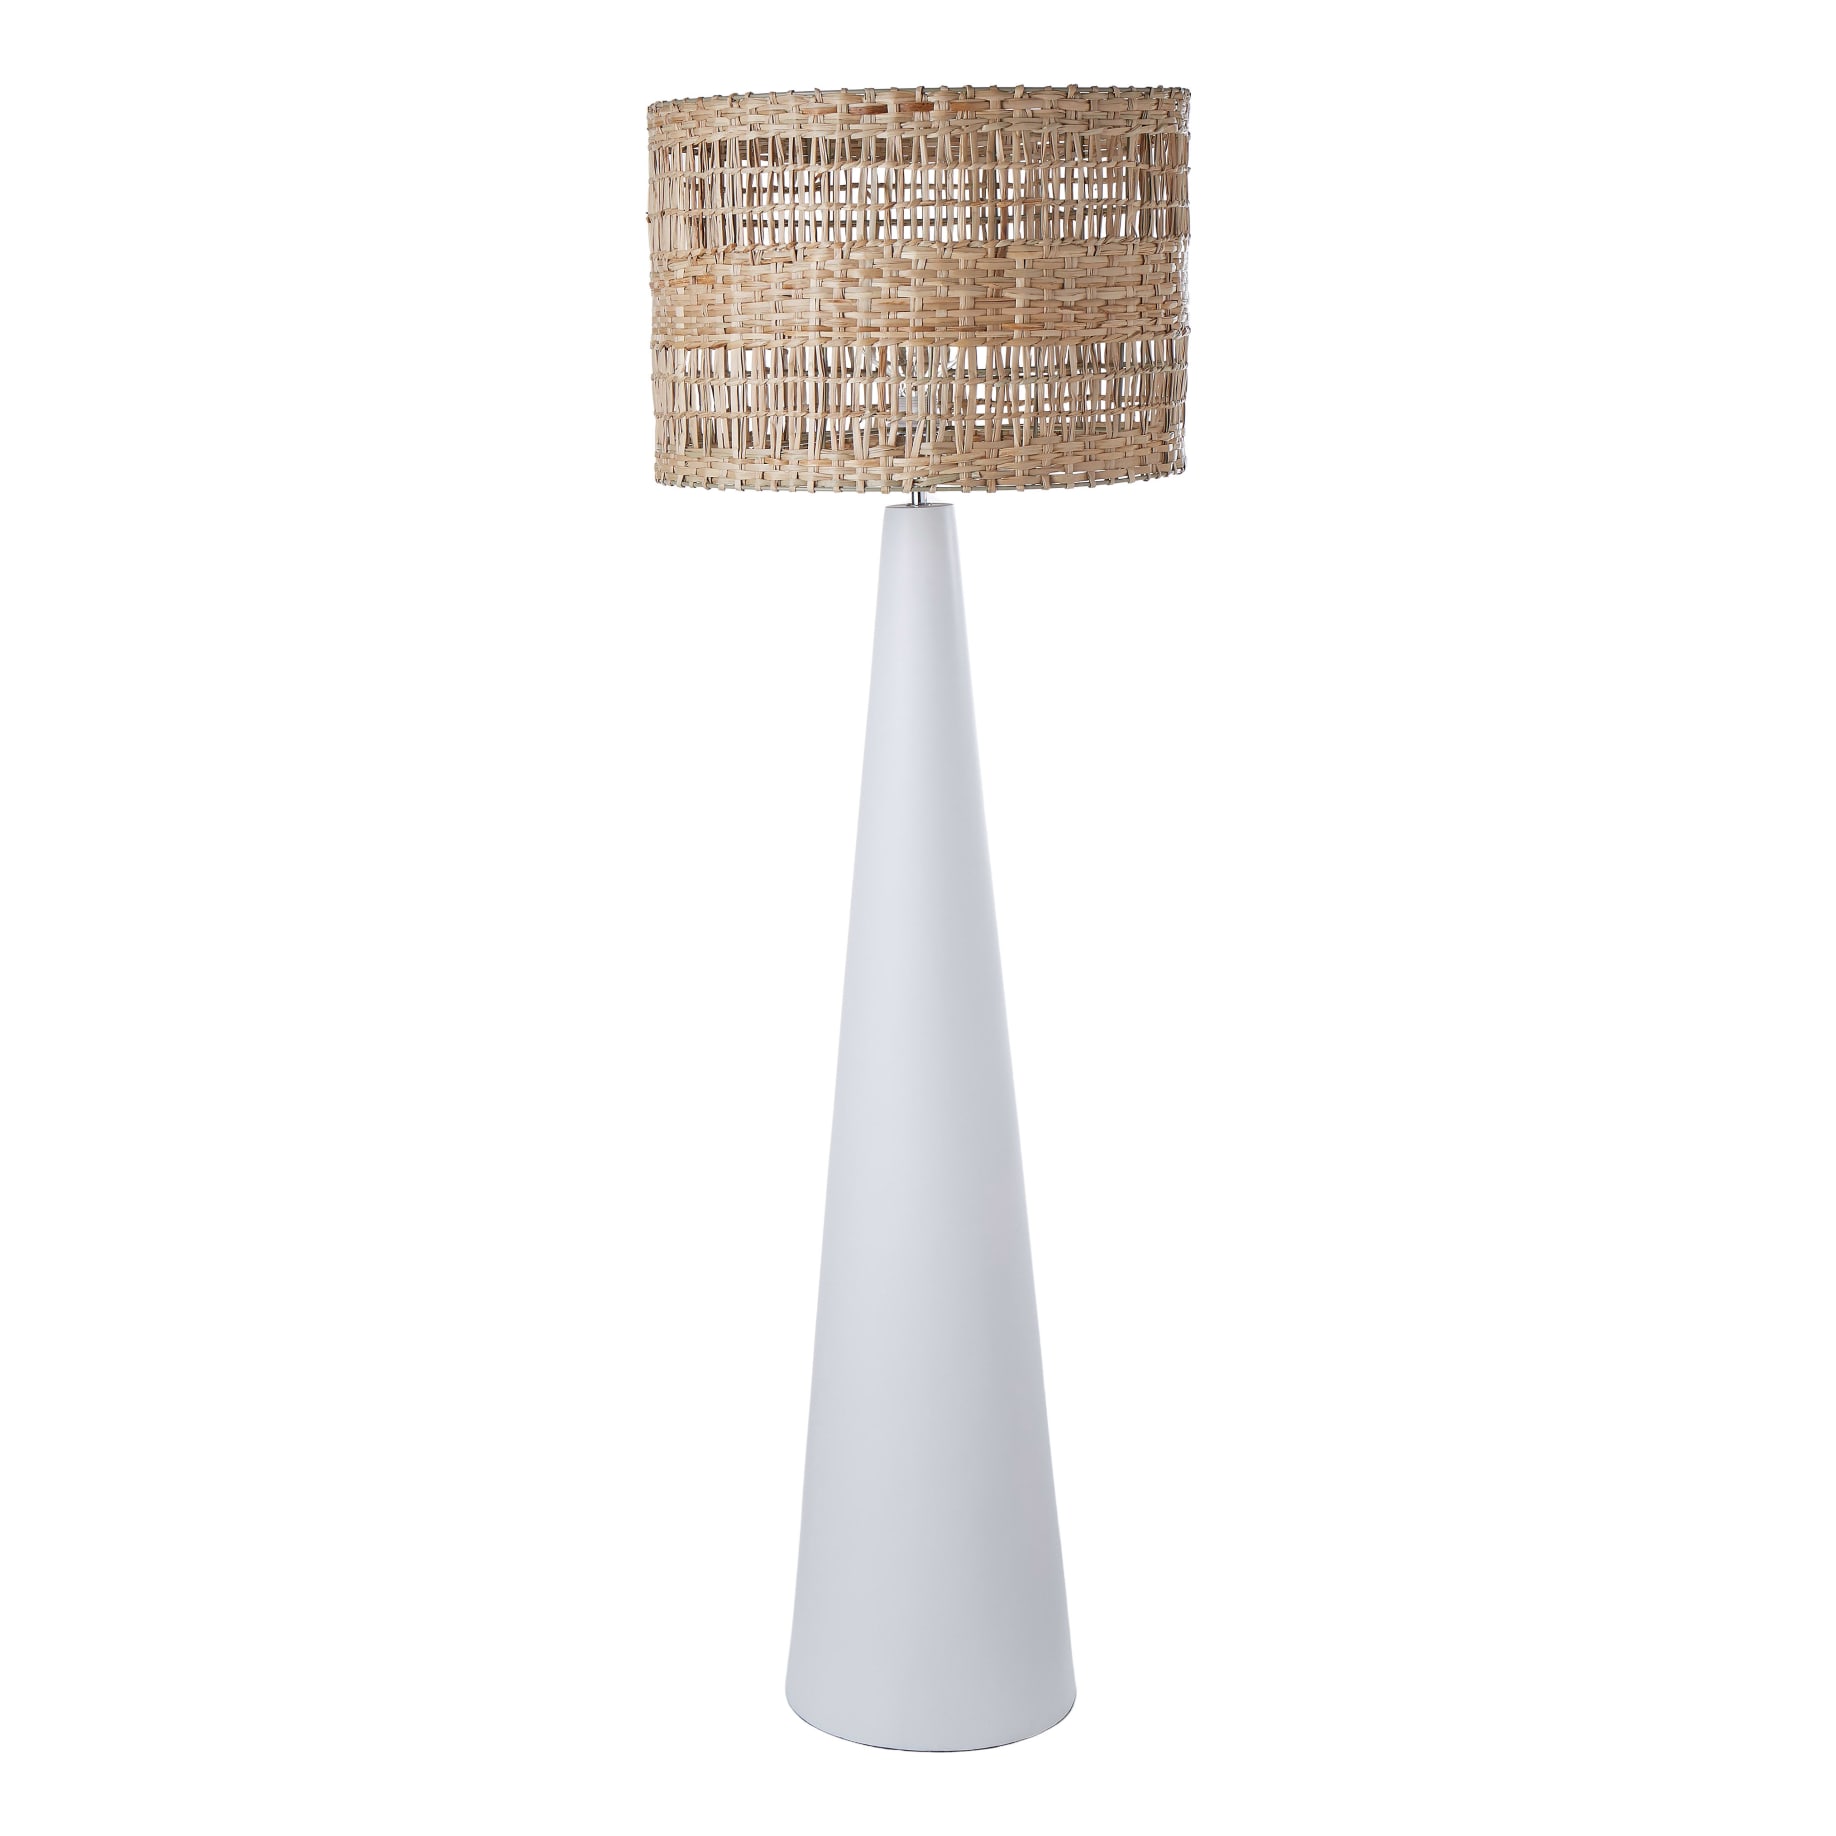 Woven Seagrass Floor Lamp 50x150cm in White